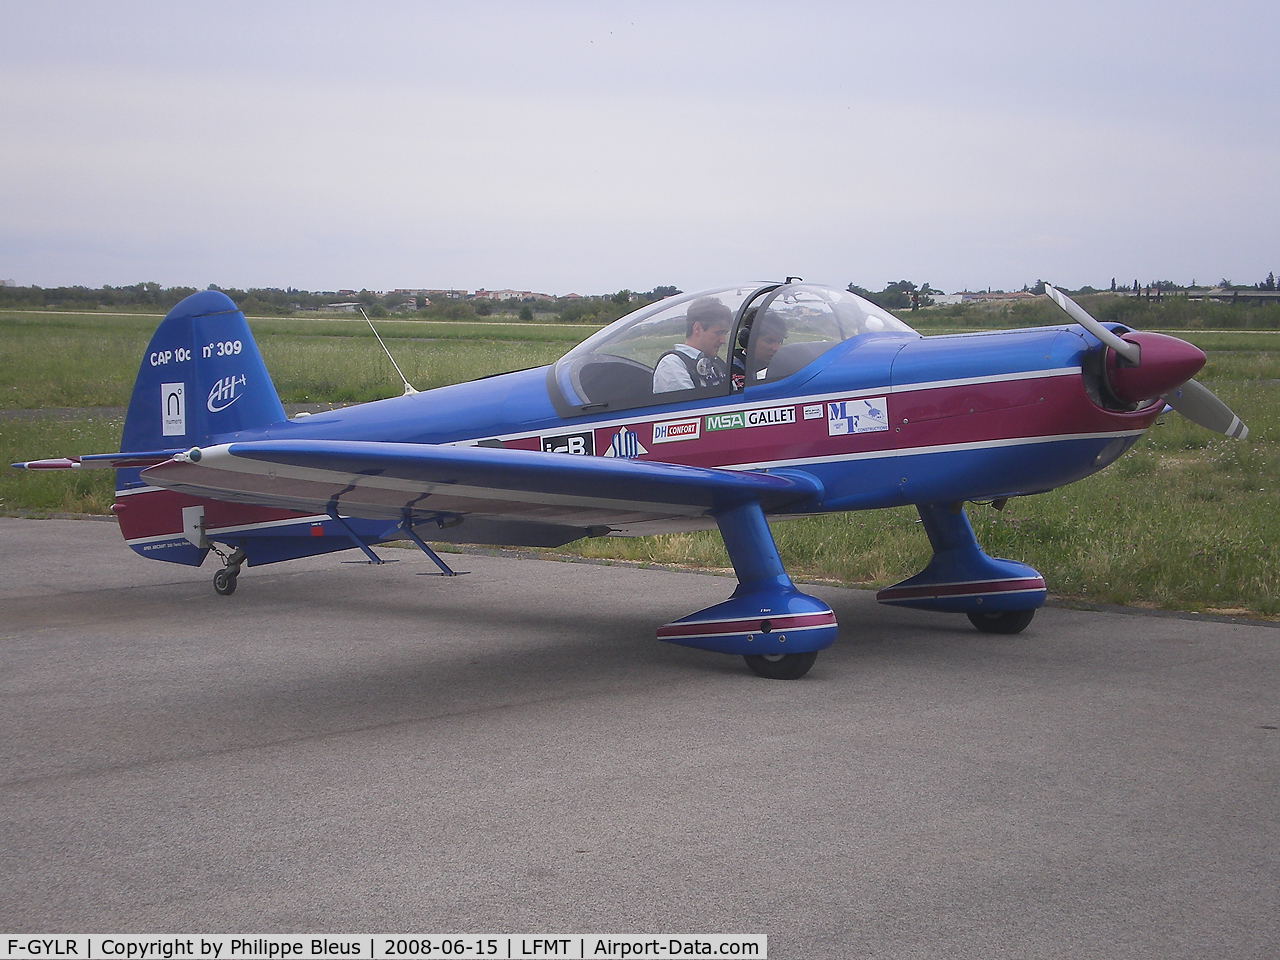 F-GYLR, Mudry CAP-10C C/N 309, Back to the parking of the 